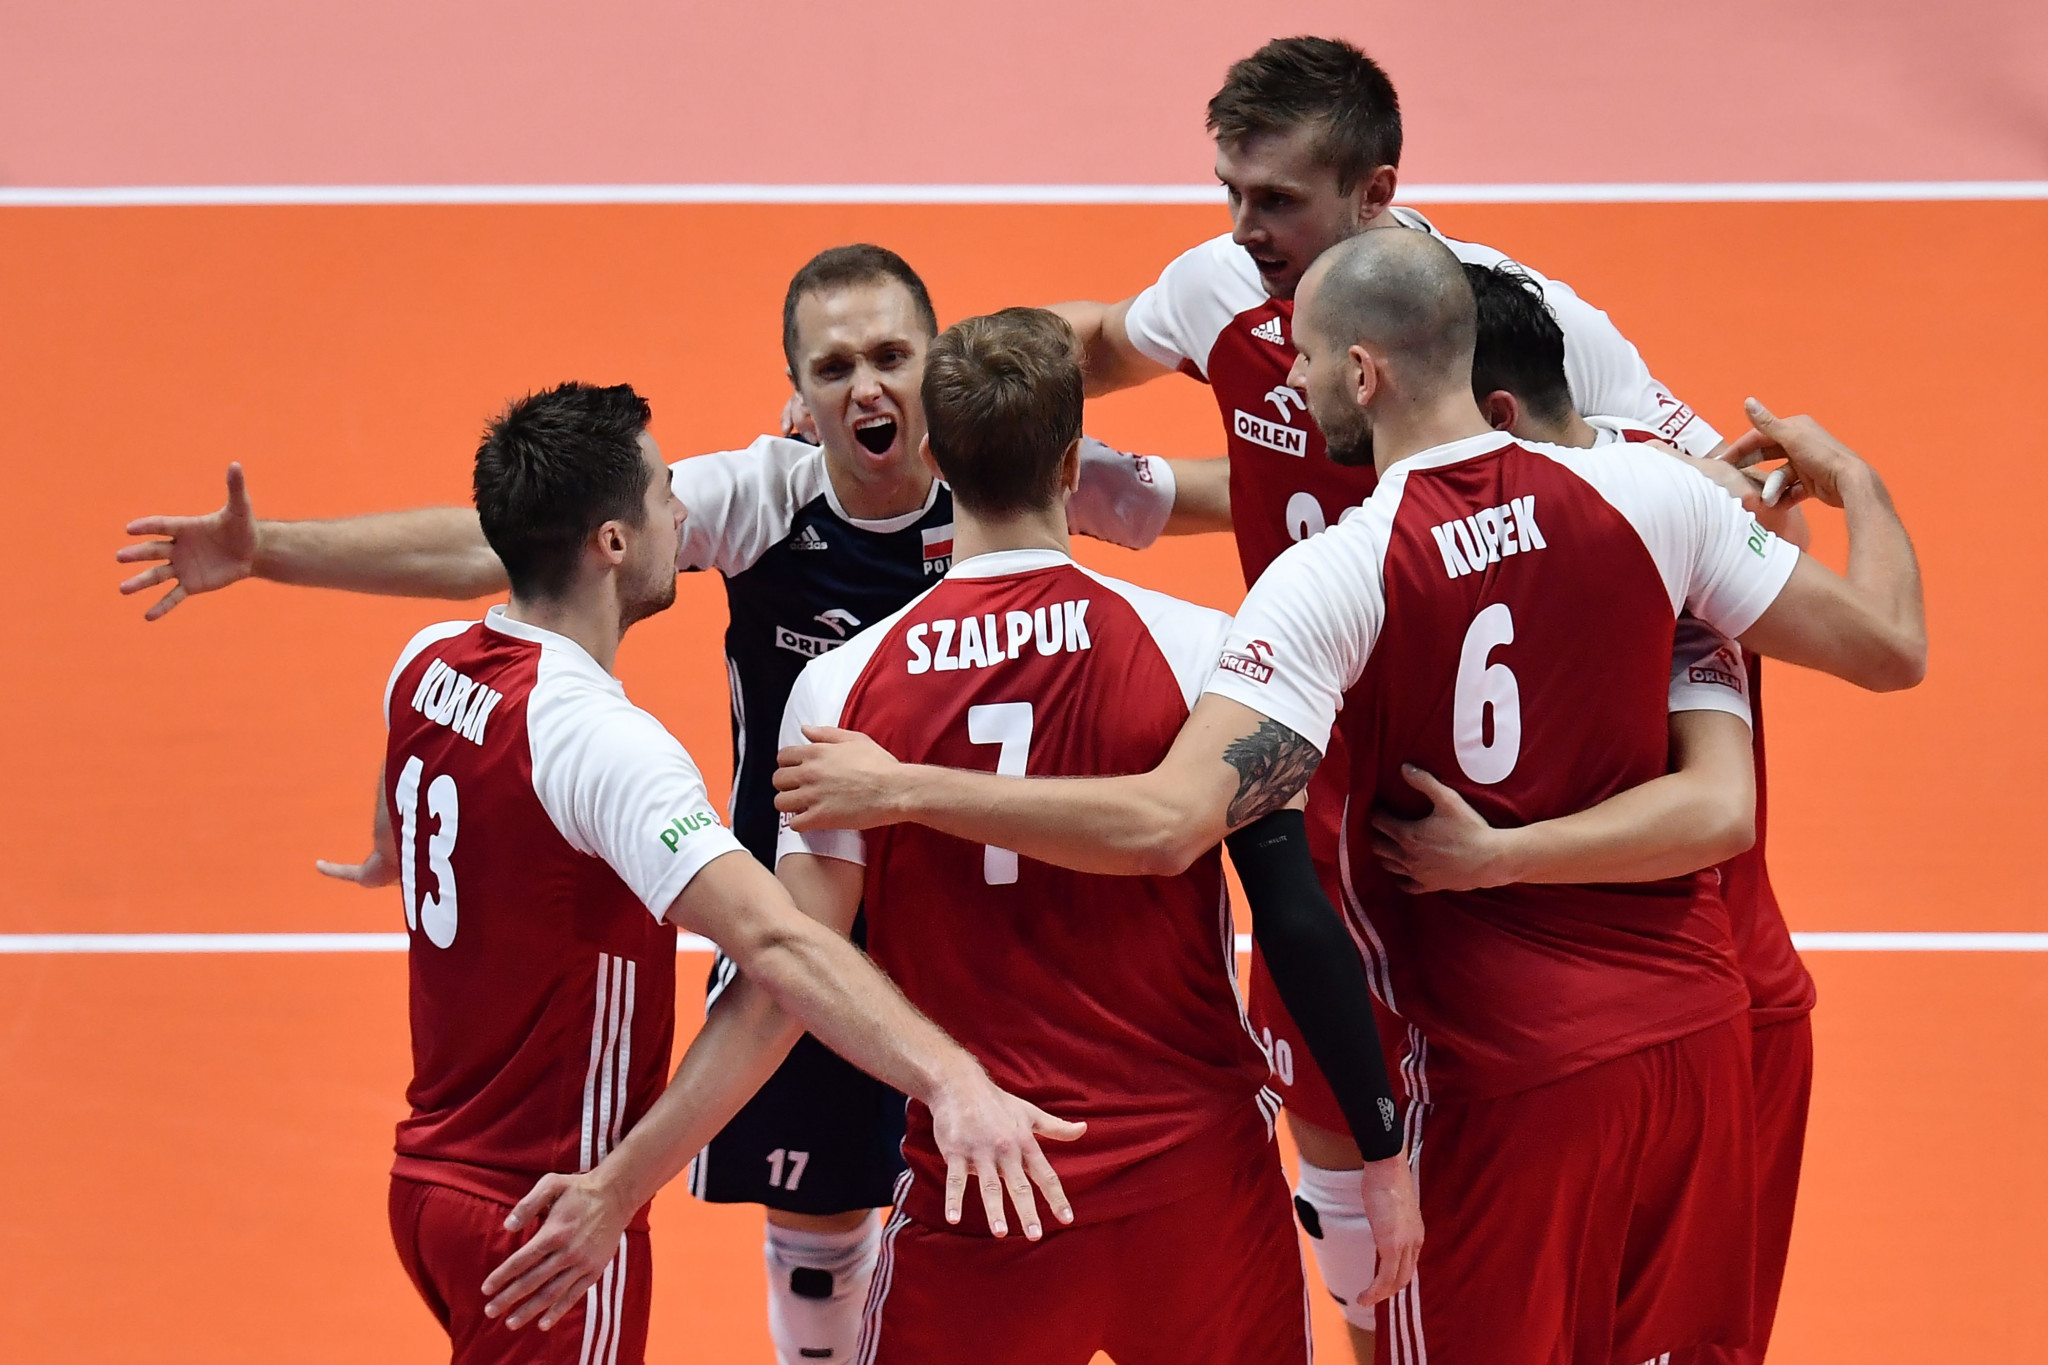 Poland and Slovenia to host Volleyball Men's World Championship moved from Russia